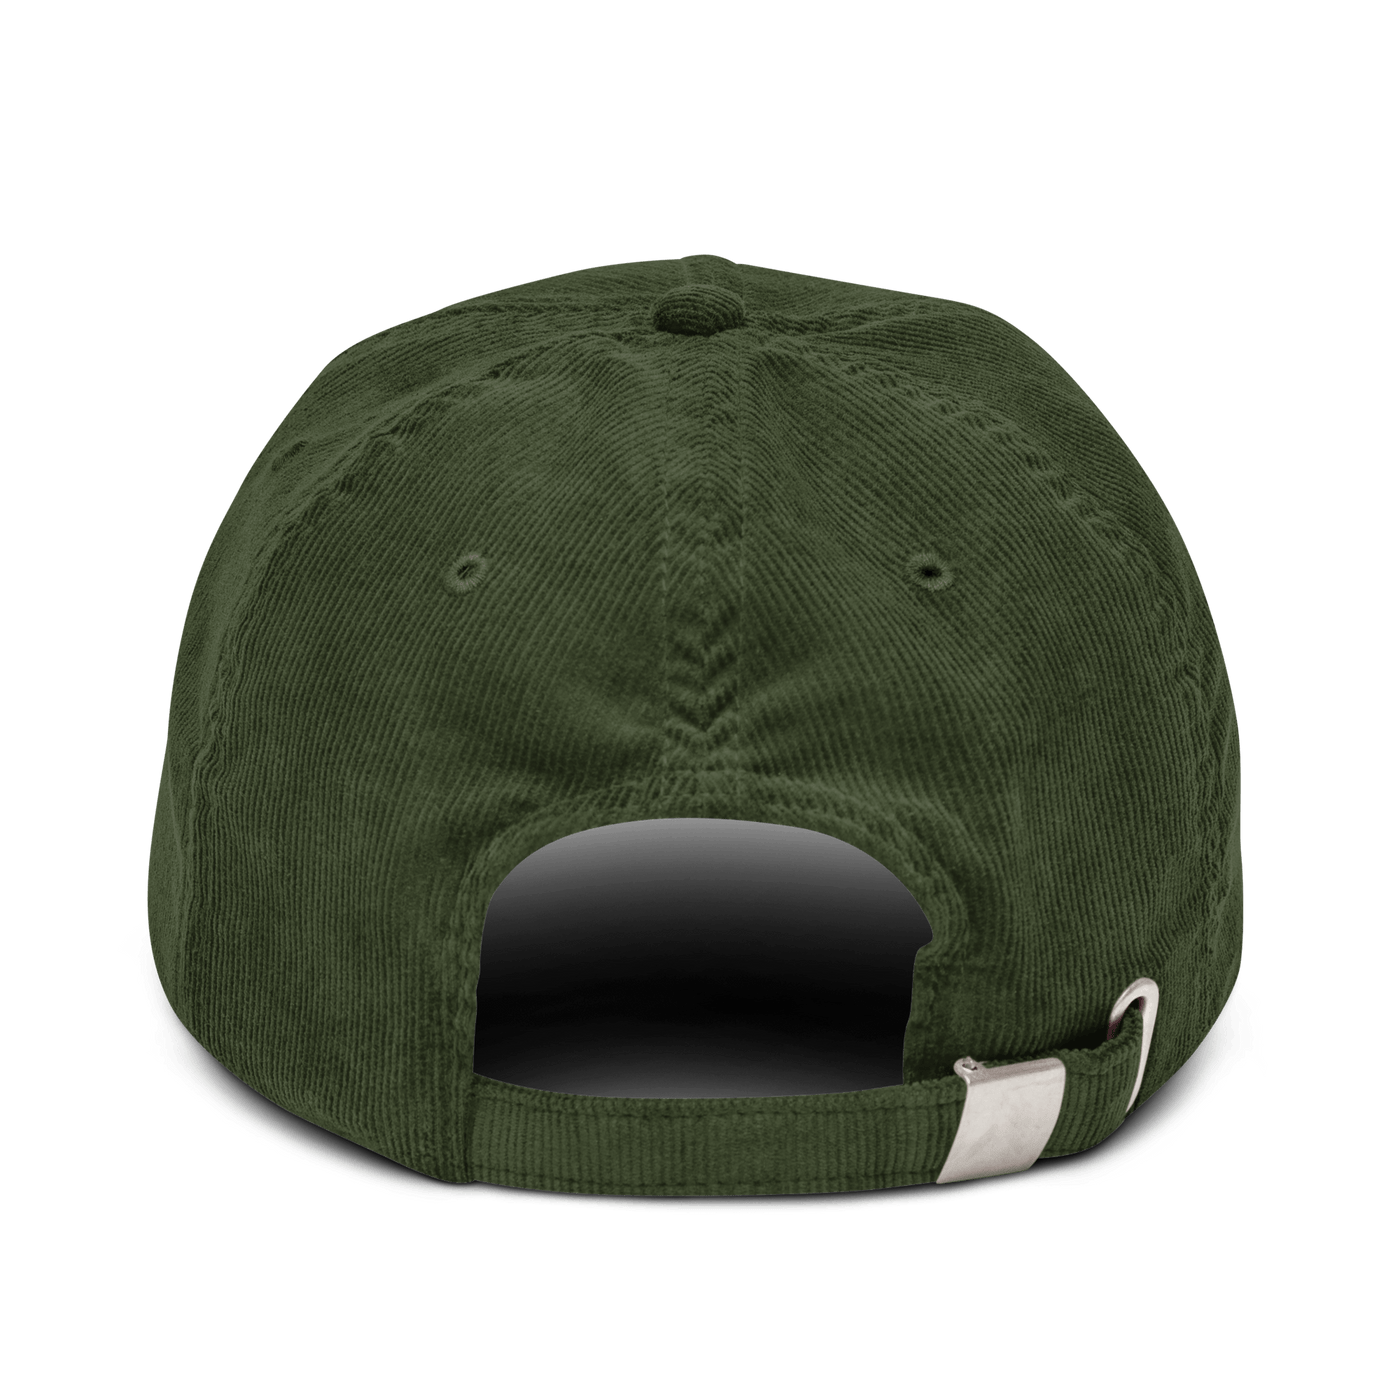 Bunker Boys Club Corduroy hat - Dark Olive - - Just Another Cap Store